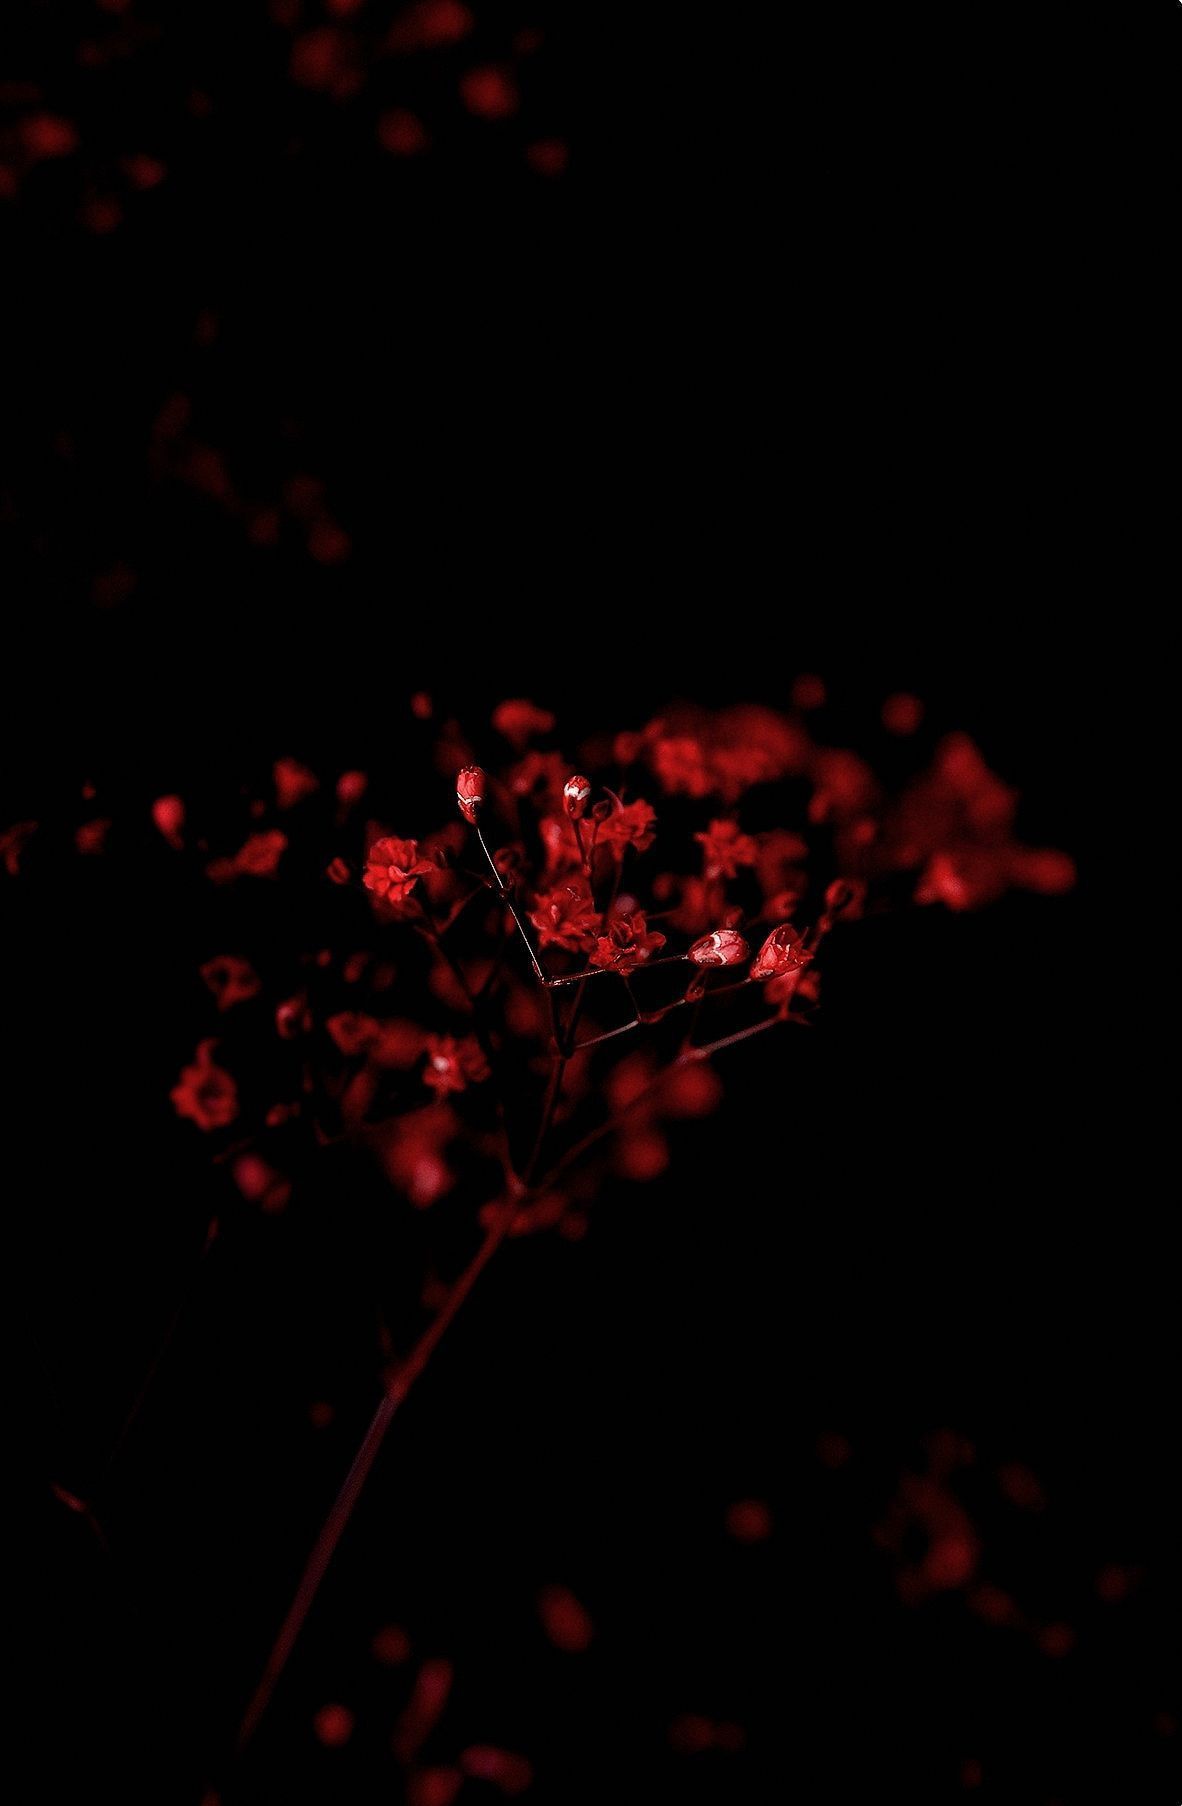 Red flowers on a black background - Light red, dark red